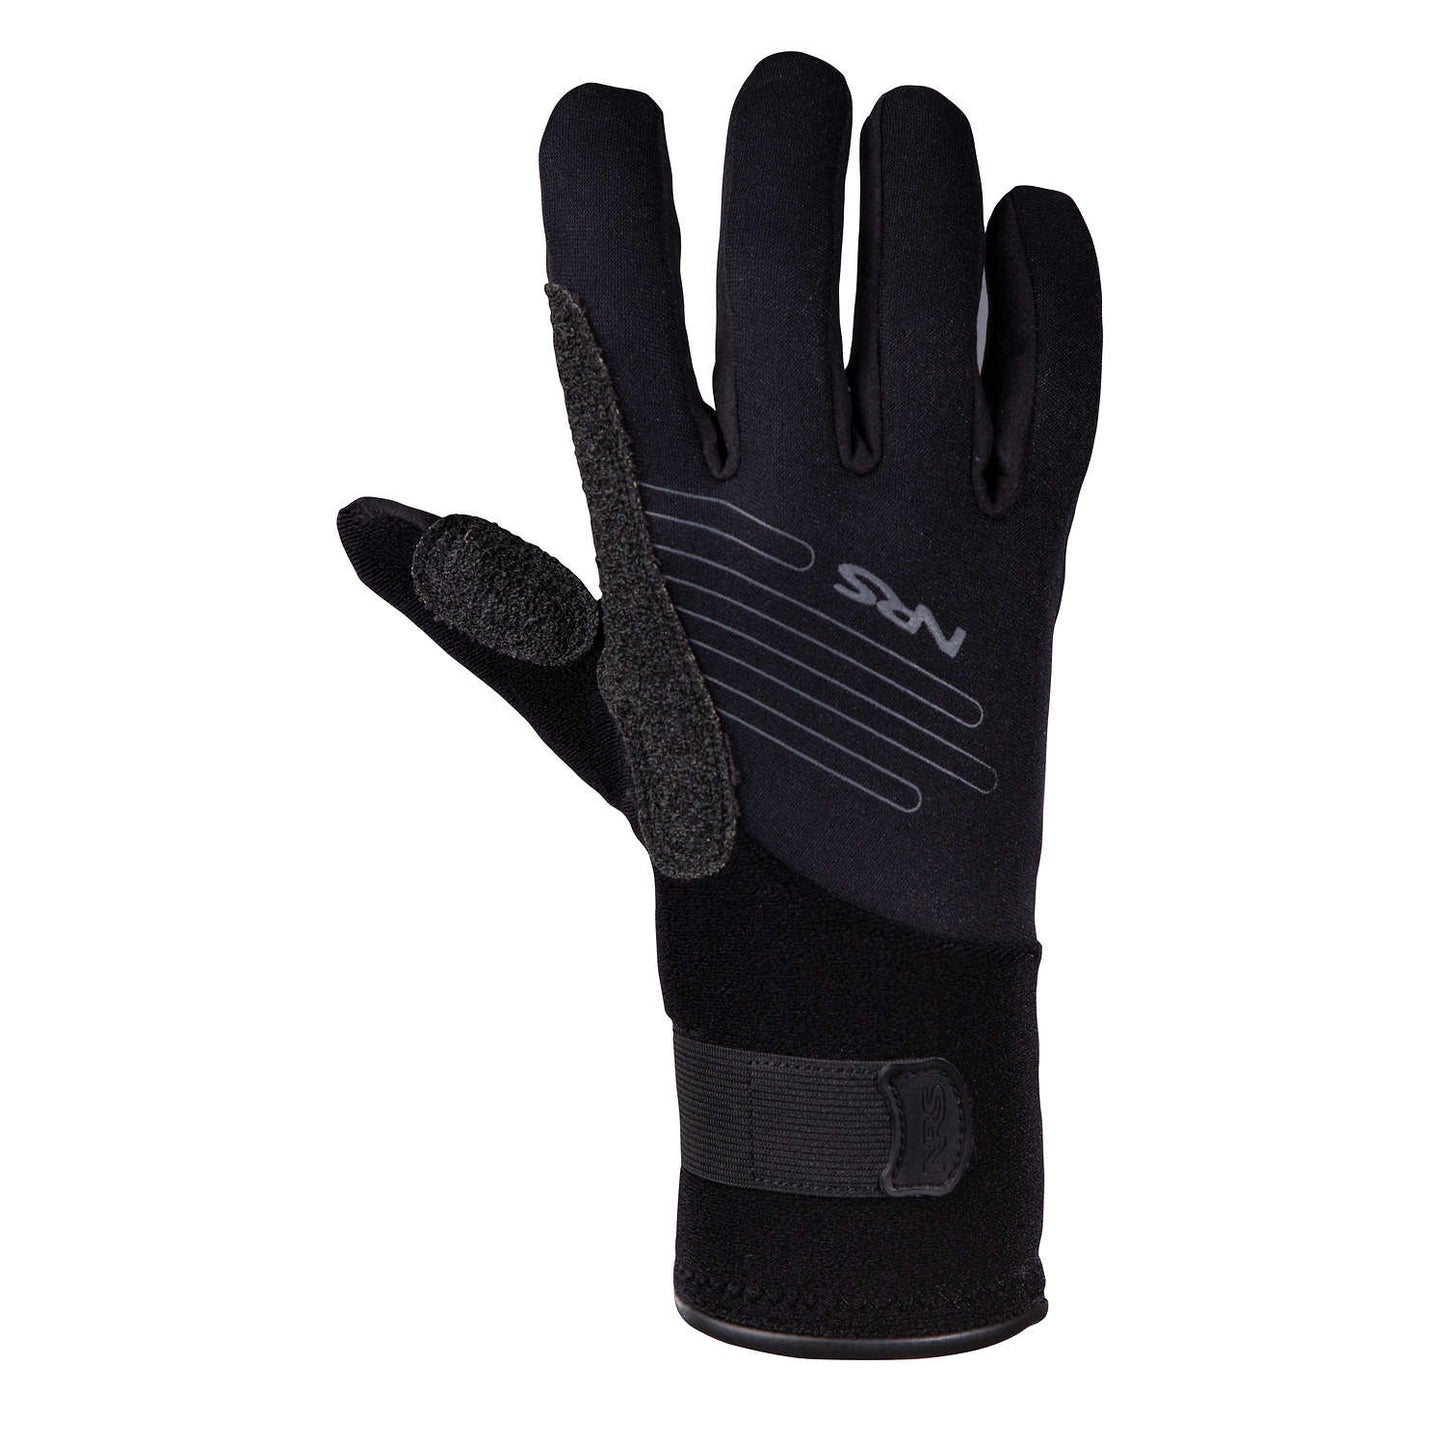 NRS Tactical Gloves